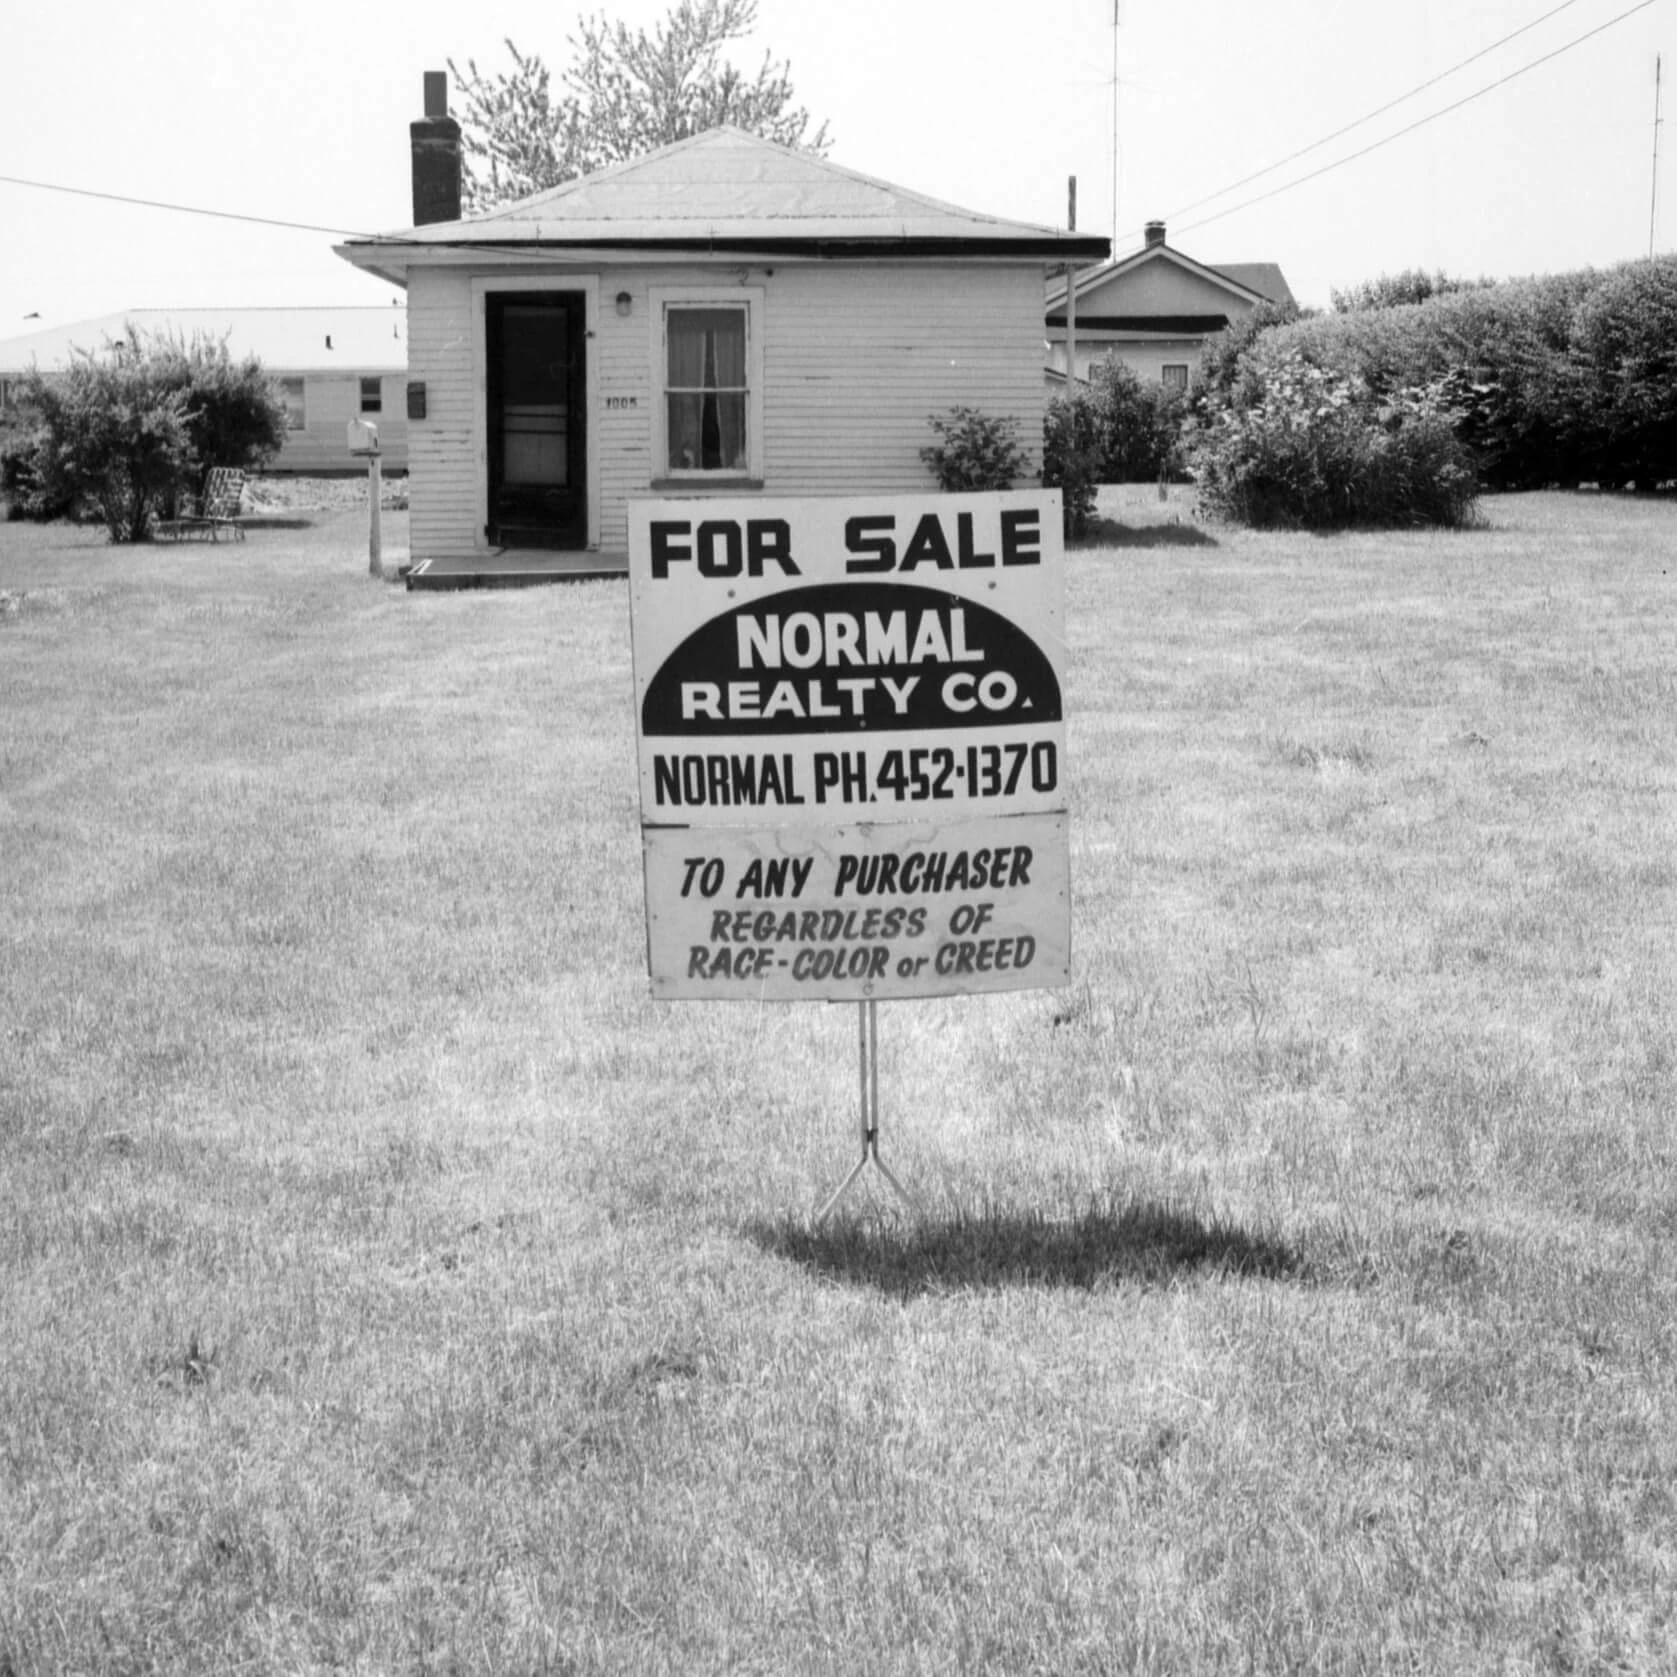 A sign in front of a small white house reads 'For Sale. Normal Realty Co. Normal Ph. 452-1370. To any purchaser, regardless of race, color, or creed.